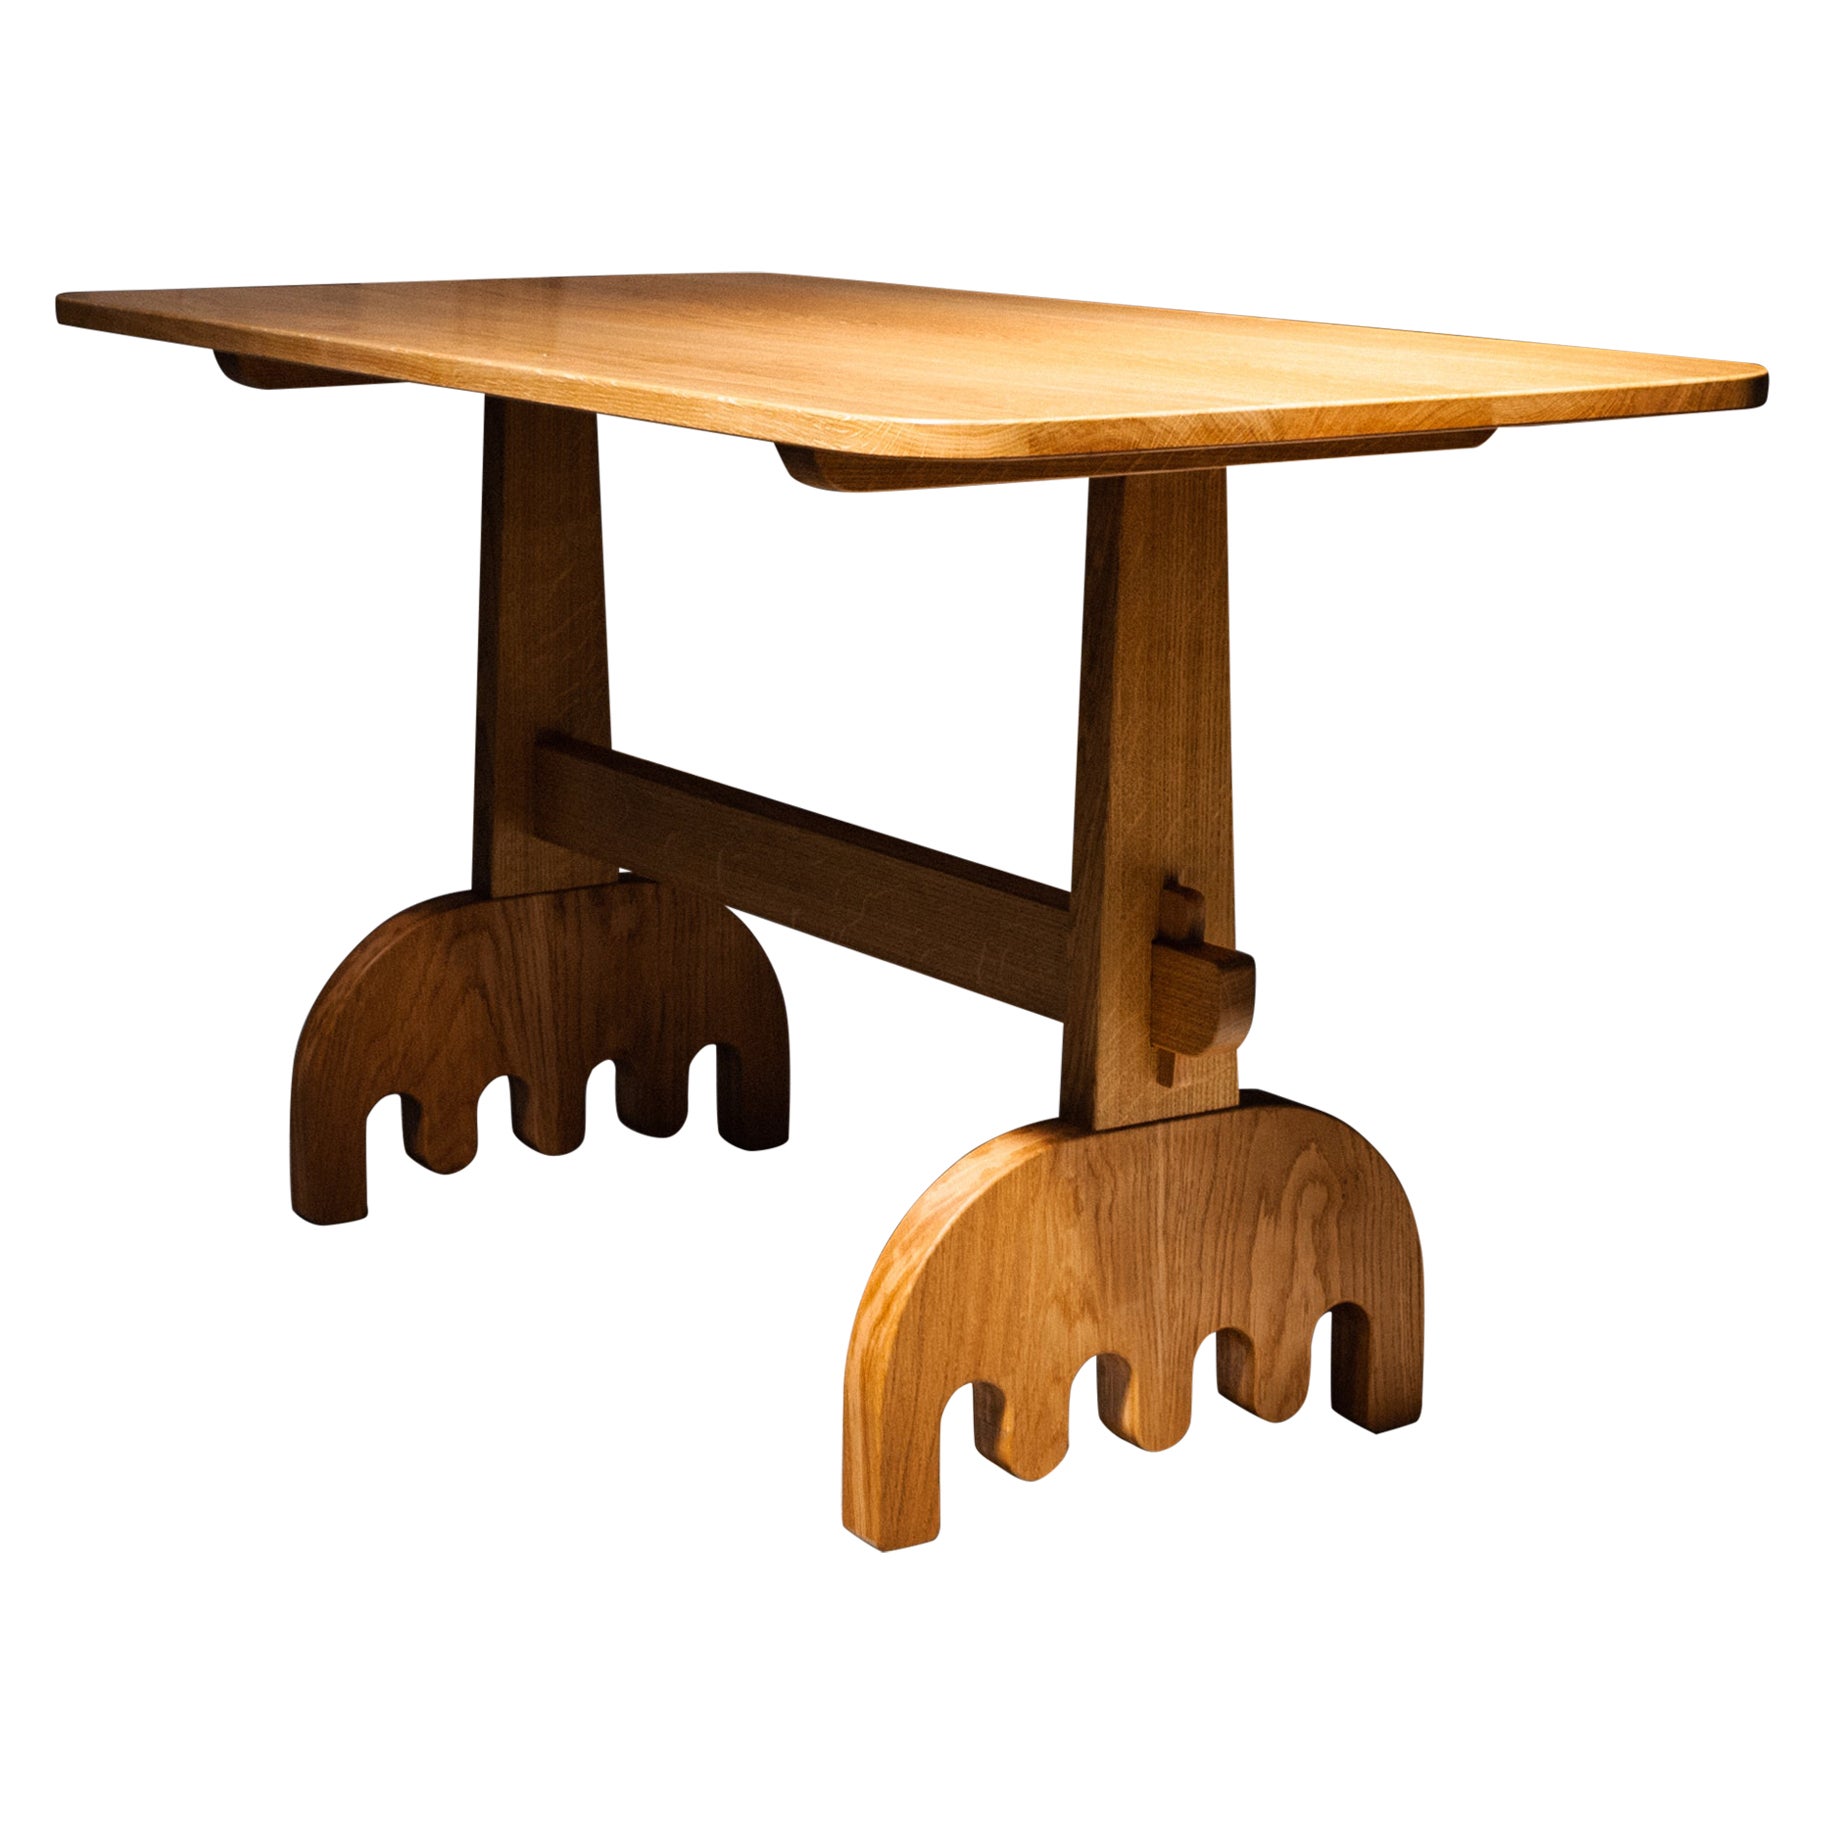 Refectory Dining Table, Solid Oak, Organic Modern, Design by Loose Fit, UK